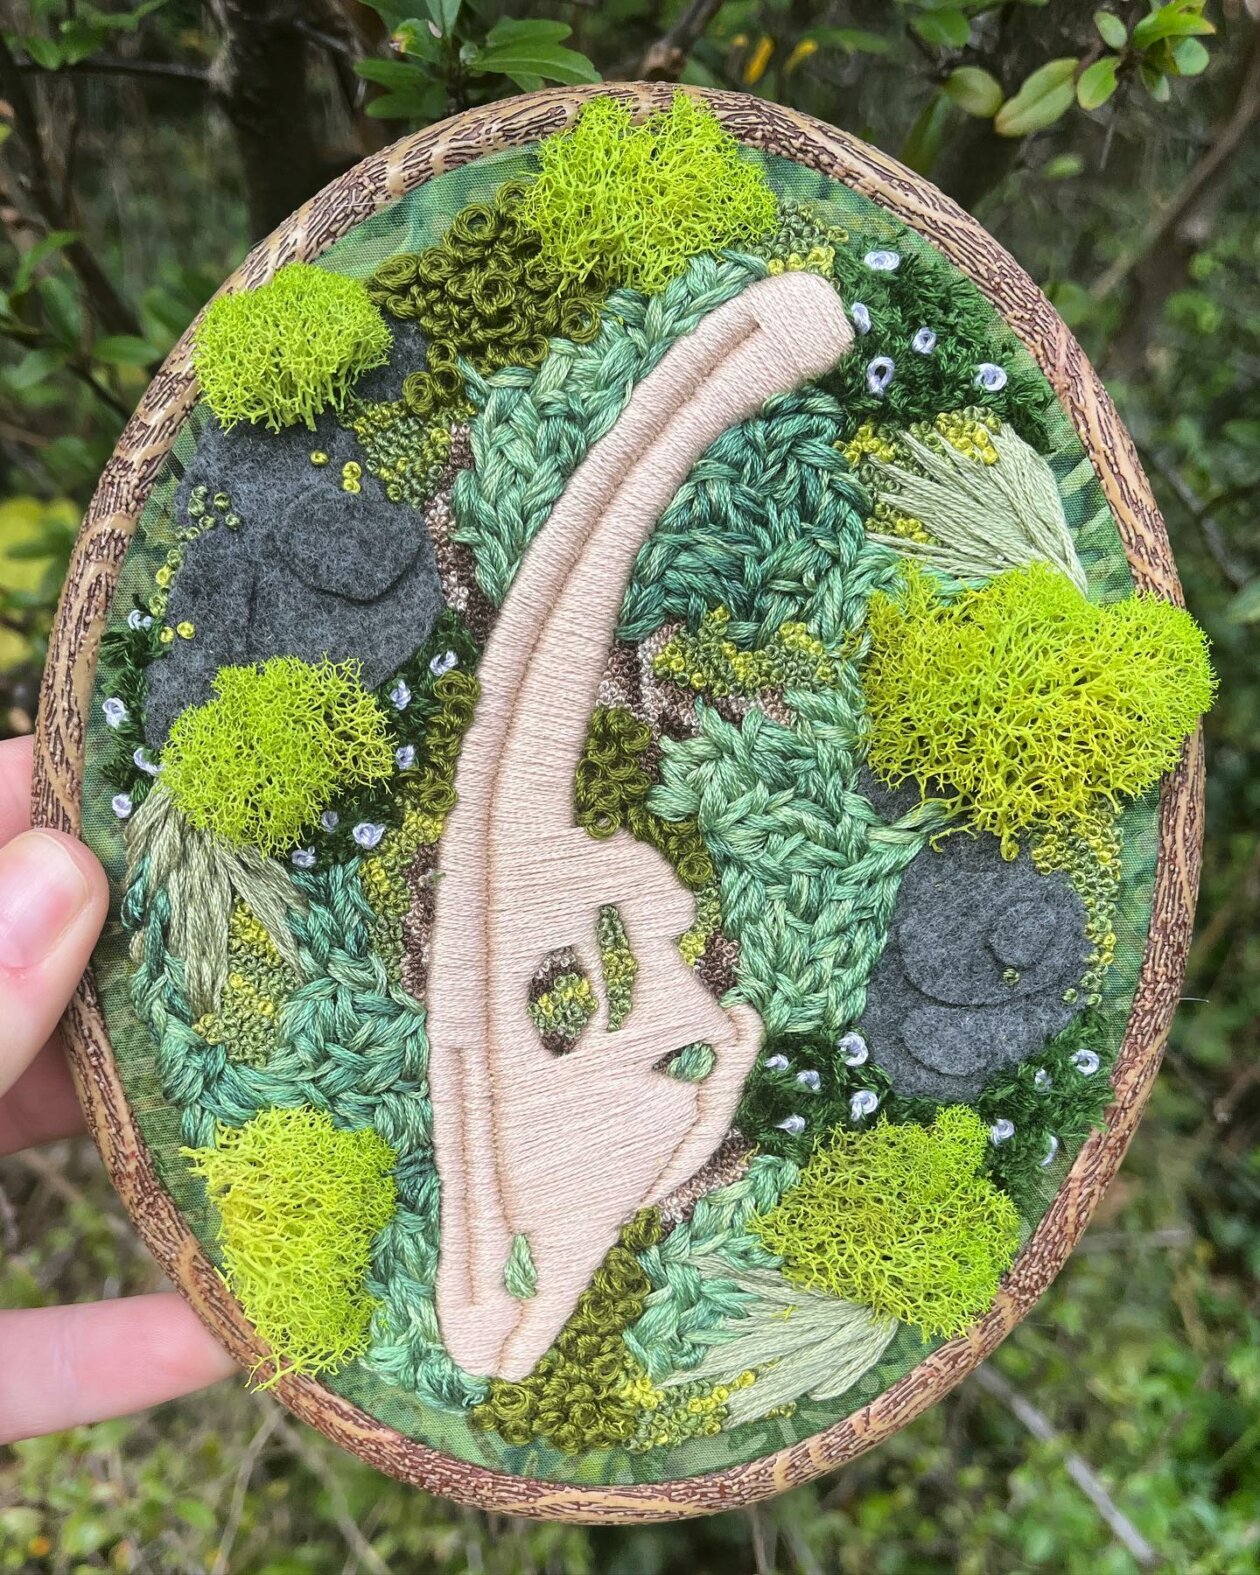 Embroidered Fossils, The Nature Inspired Embroidery Art Of Rachel Crisp (15)